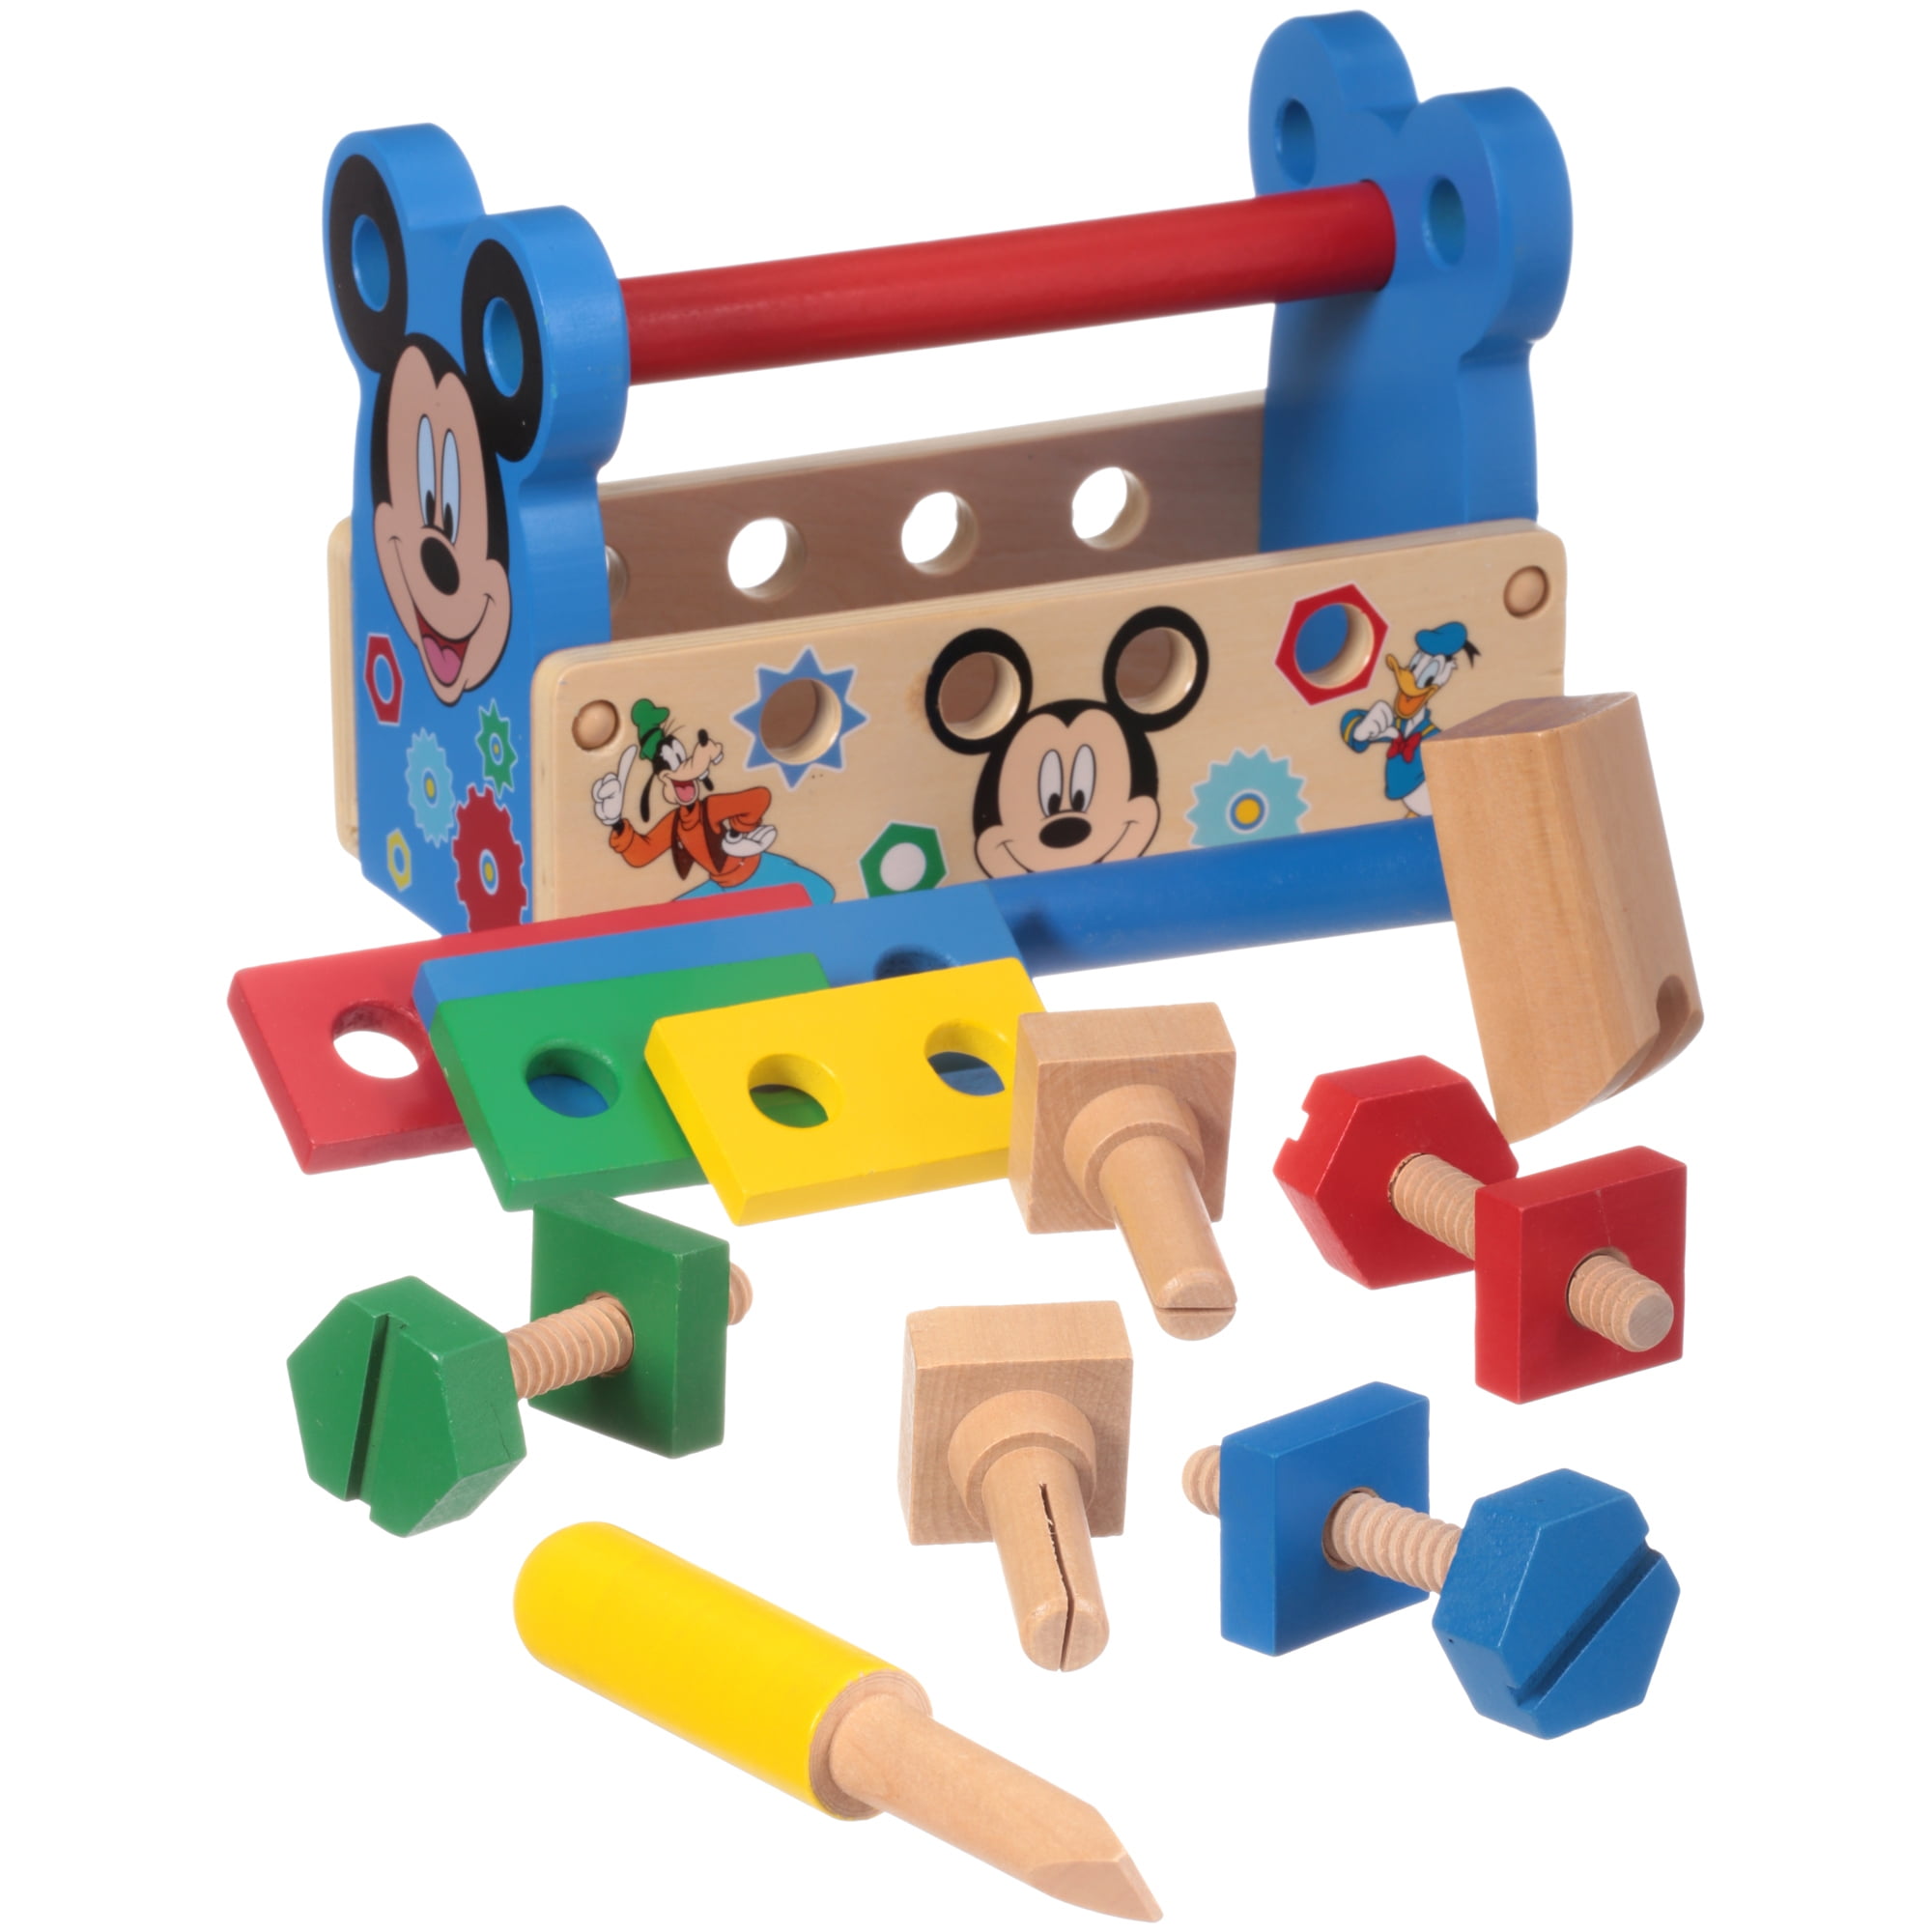 BRAND NEW Melissa And Doug Mickey Mouse Disney 10 Pc.Deluxe Band Instrument Set 